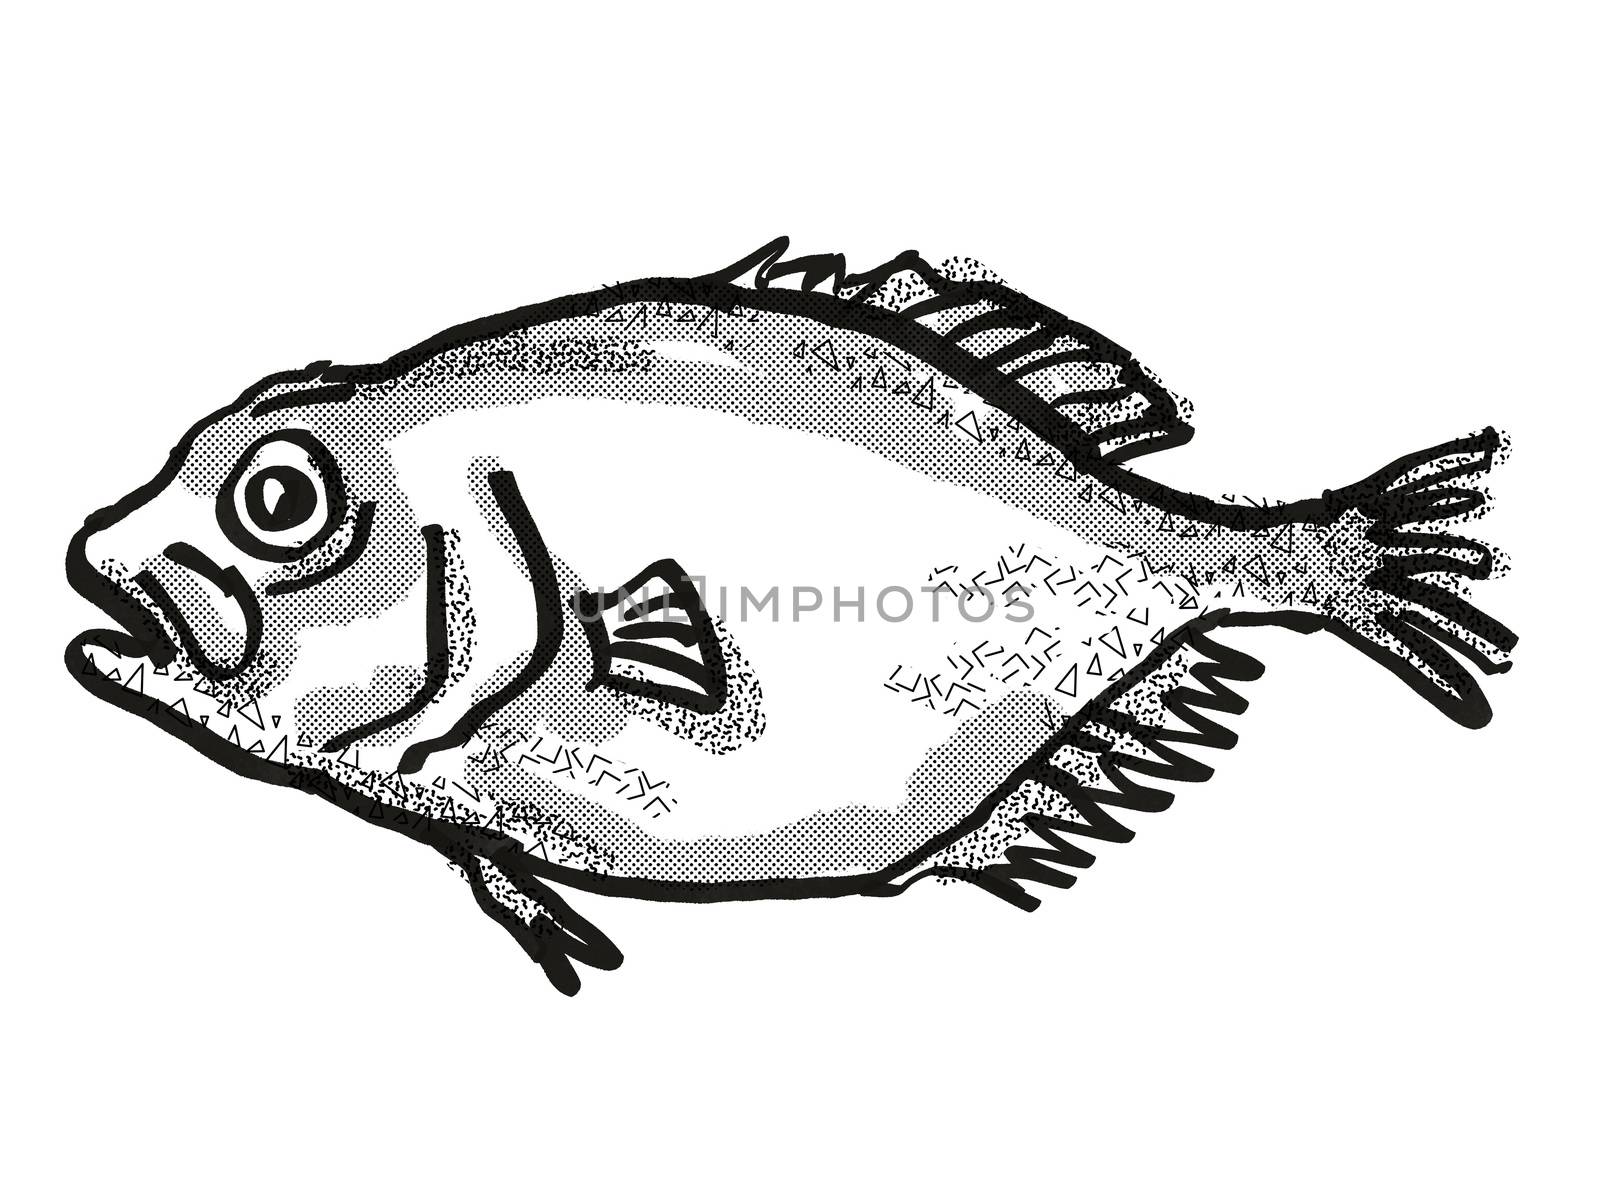 Retro cartoon style drawing of an orange roughy, a native New Zealand marine life species viewed from side on isolated white background done in black and white